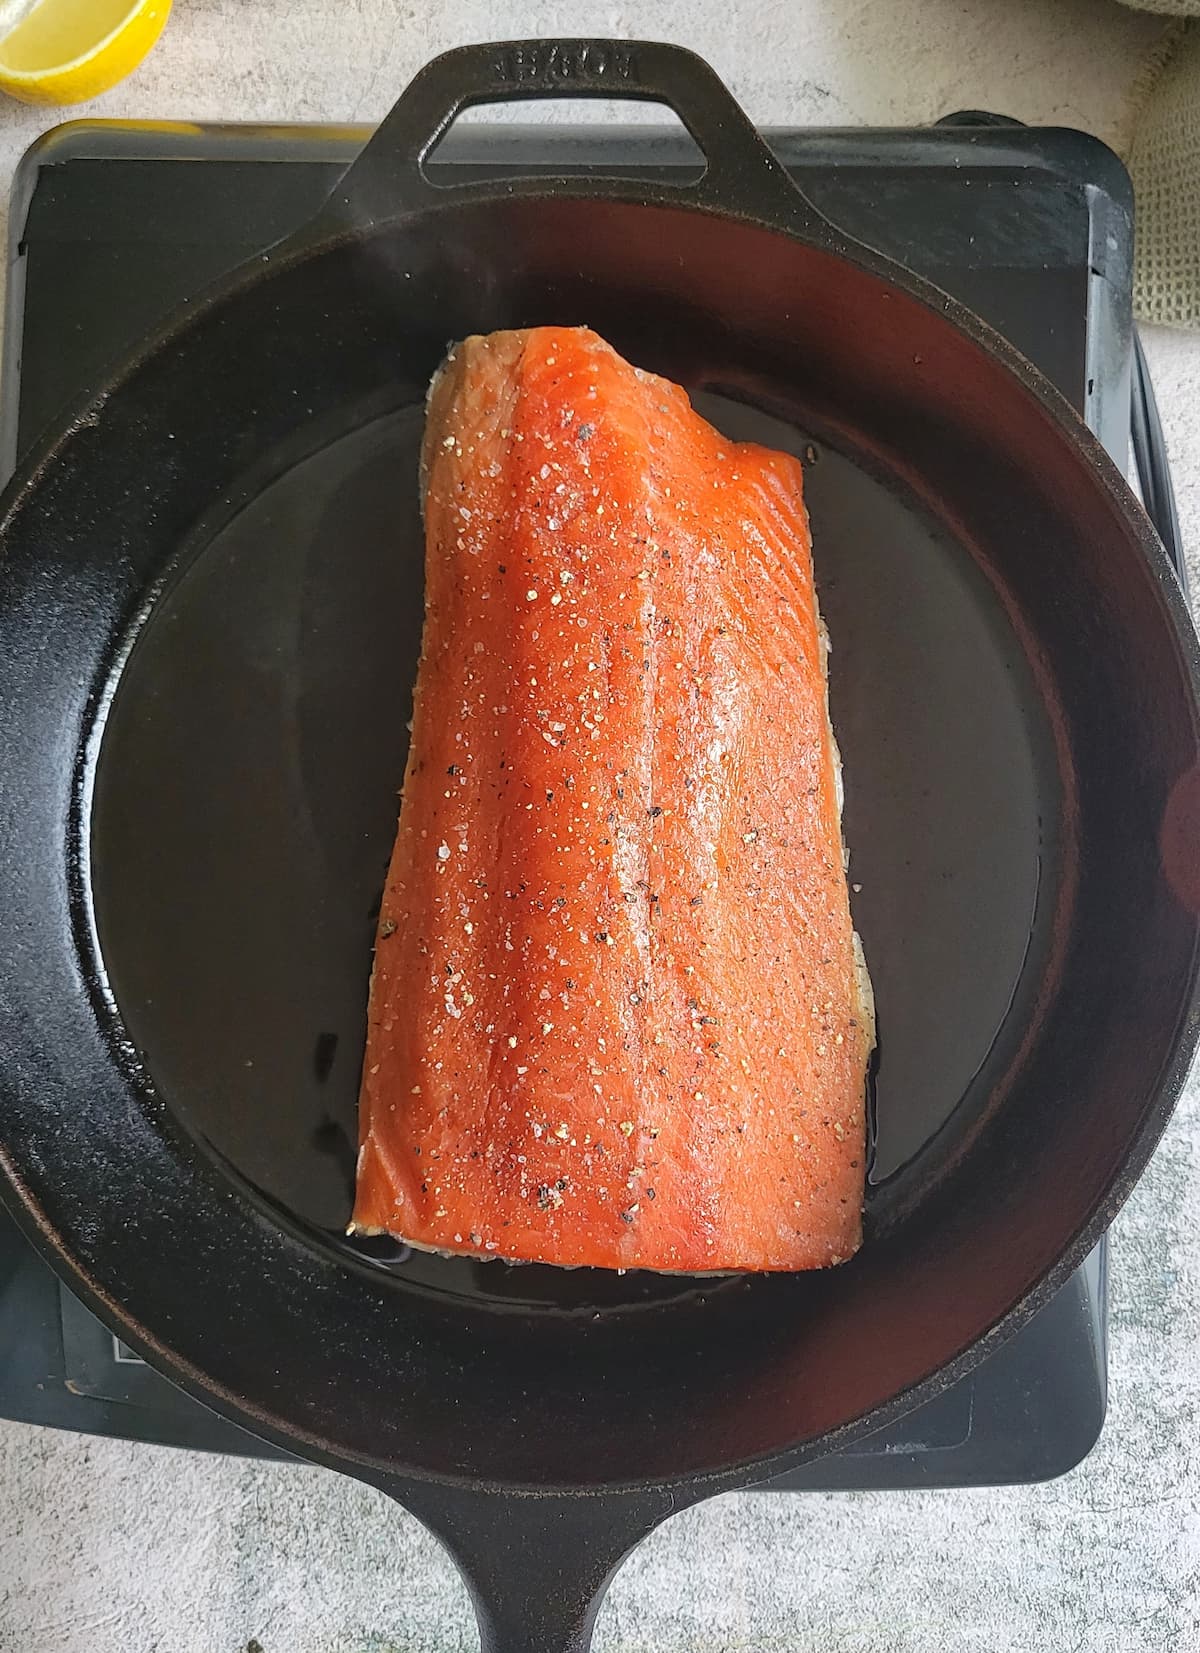 raw salmon seasoned with salt and pepper in a cast iron skillet